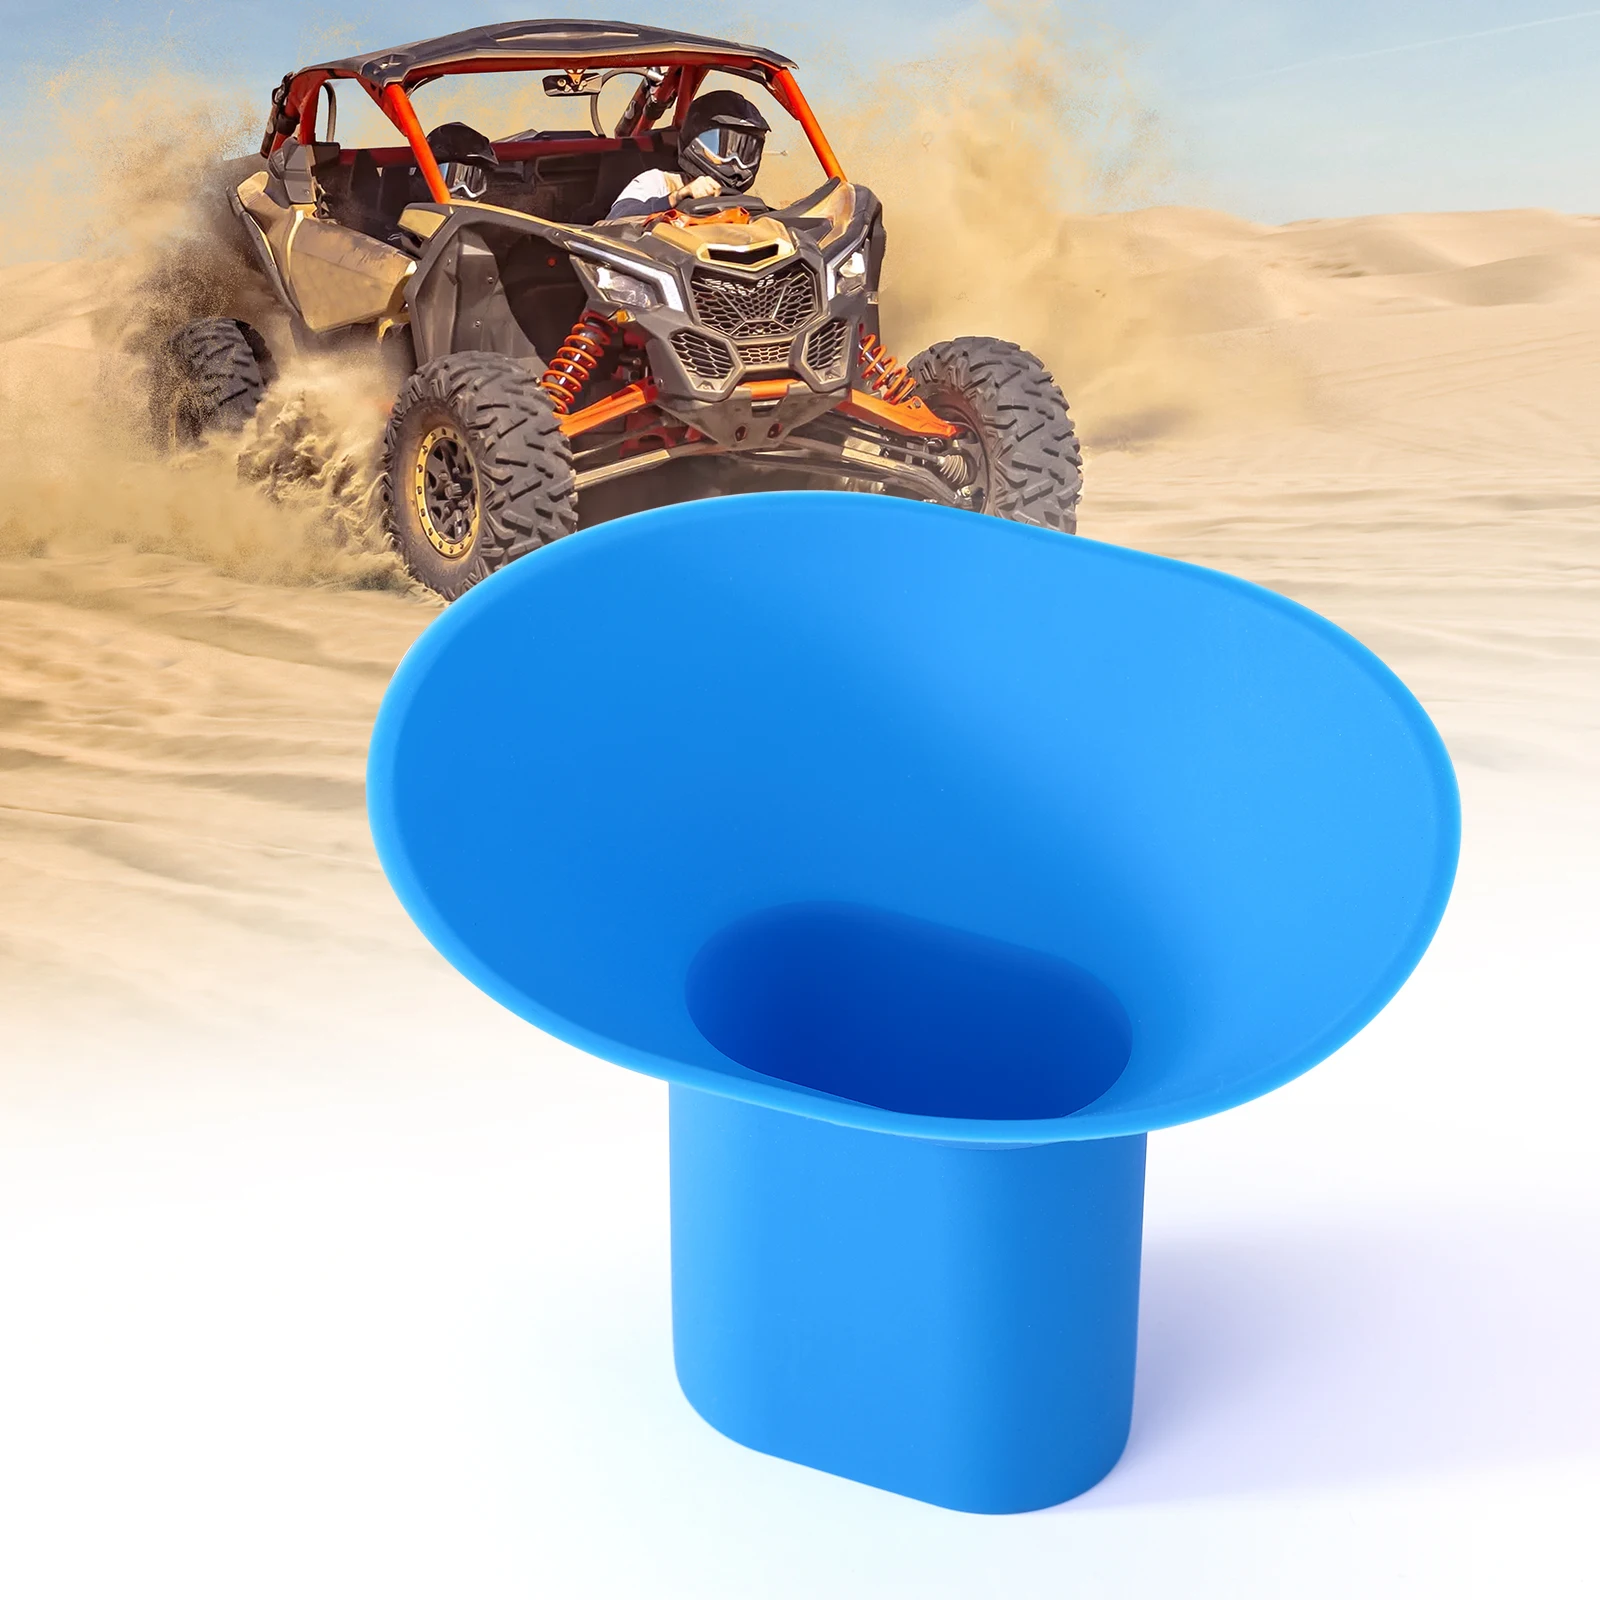 KEMIMOTO Silicone Foldable Skid Oil Change Funnel ATV UTV Universal for Can-am Maverick X3 Motorcycle Cars Truck Boat